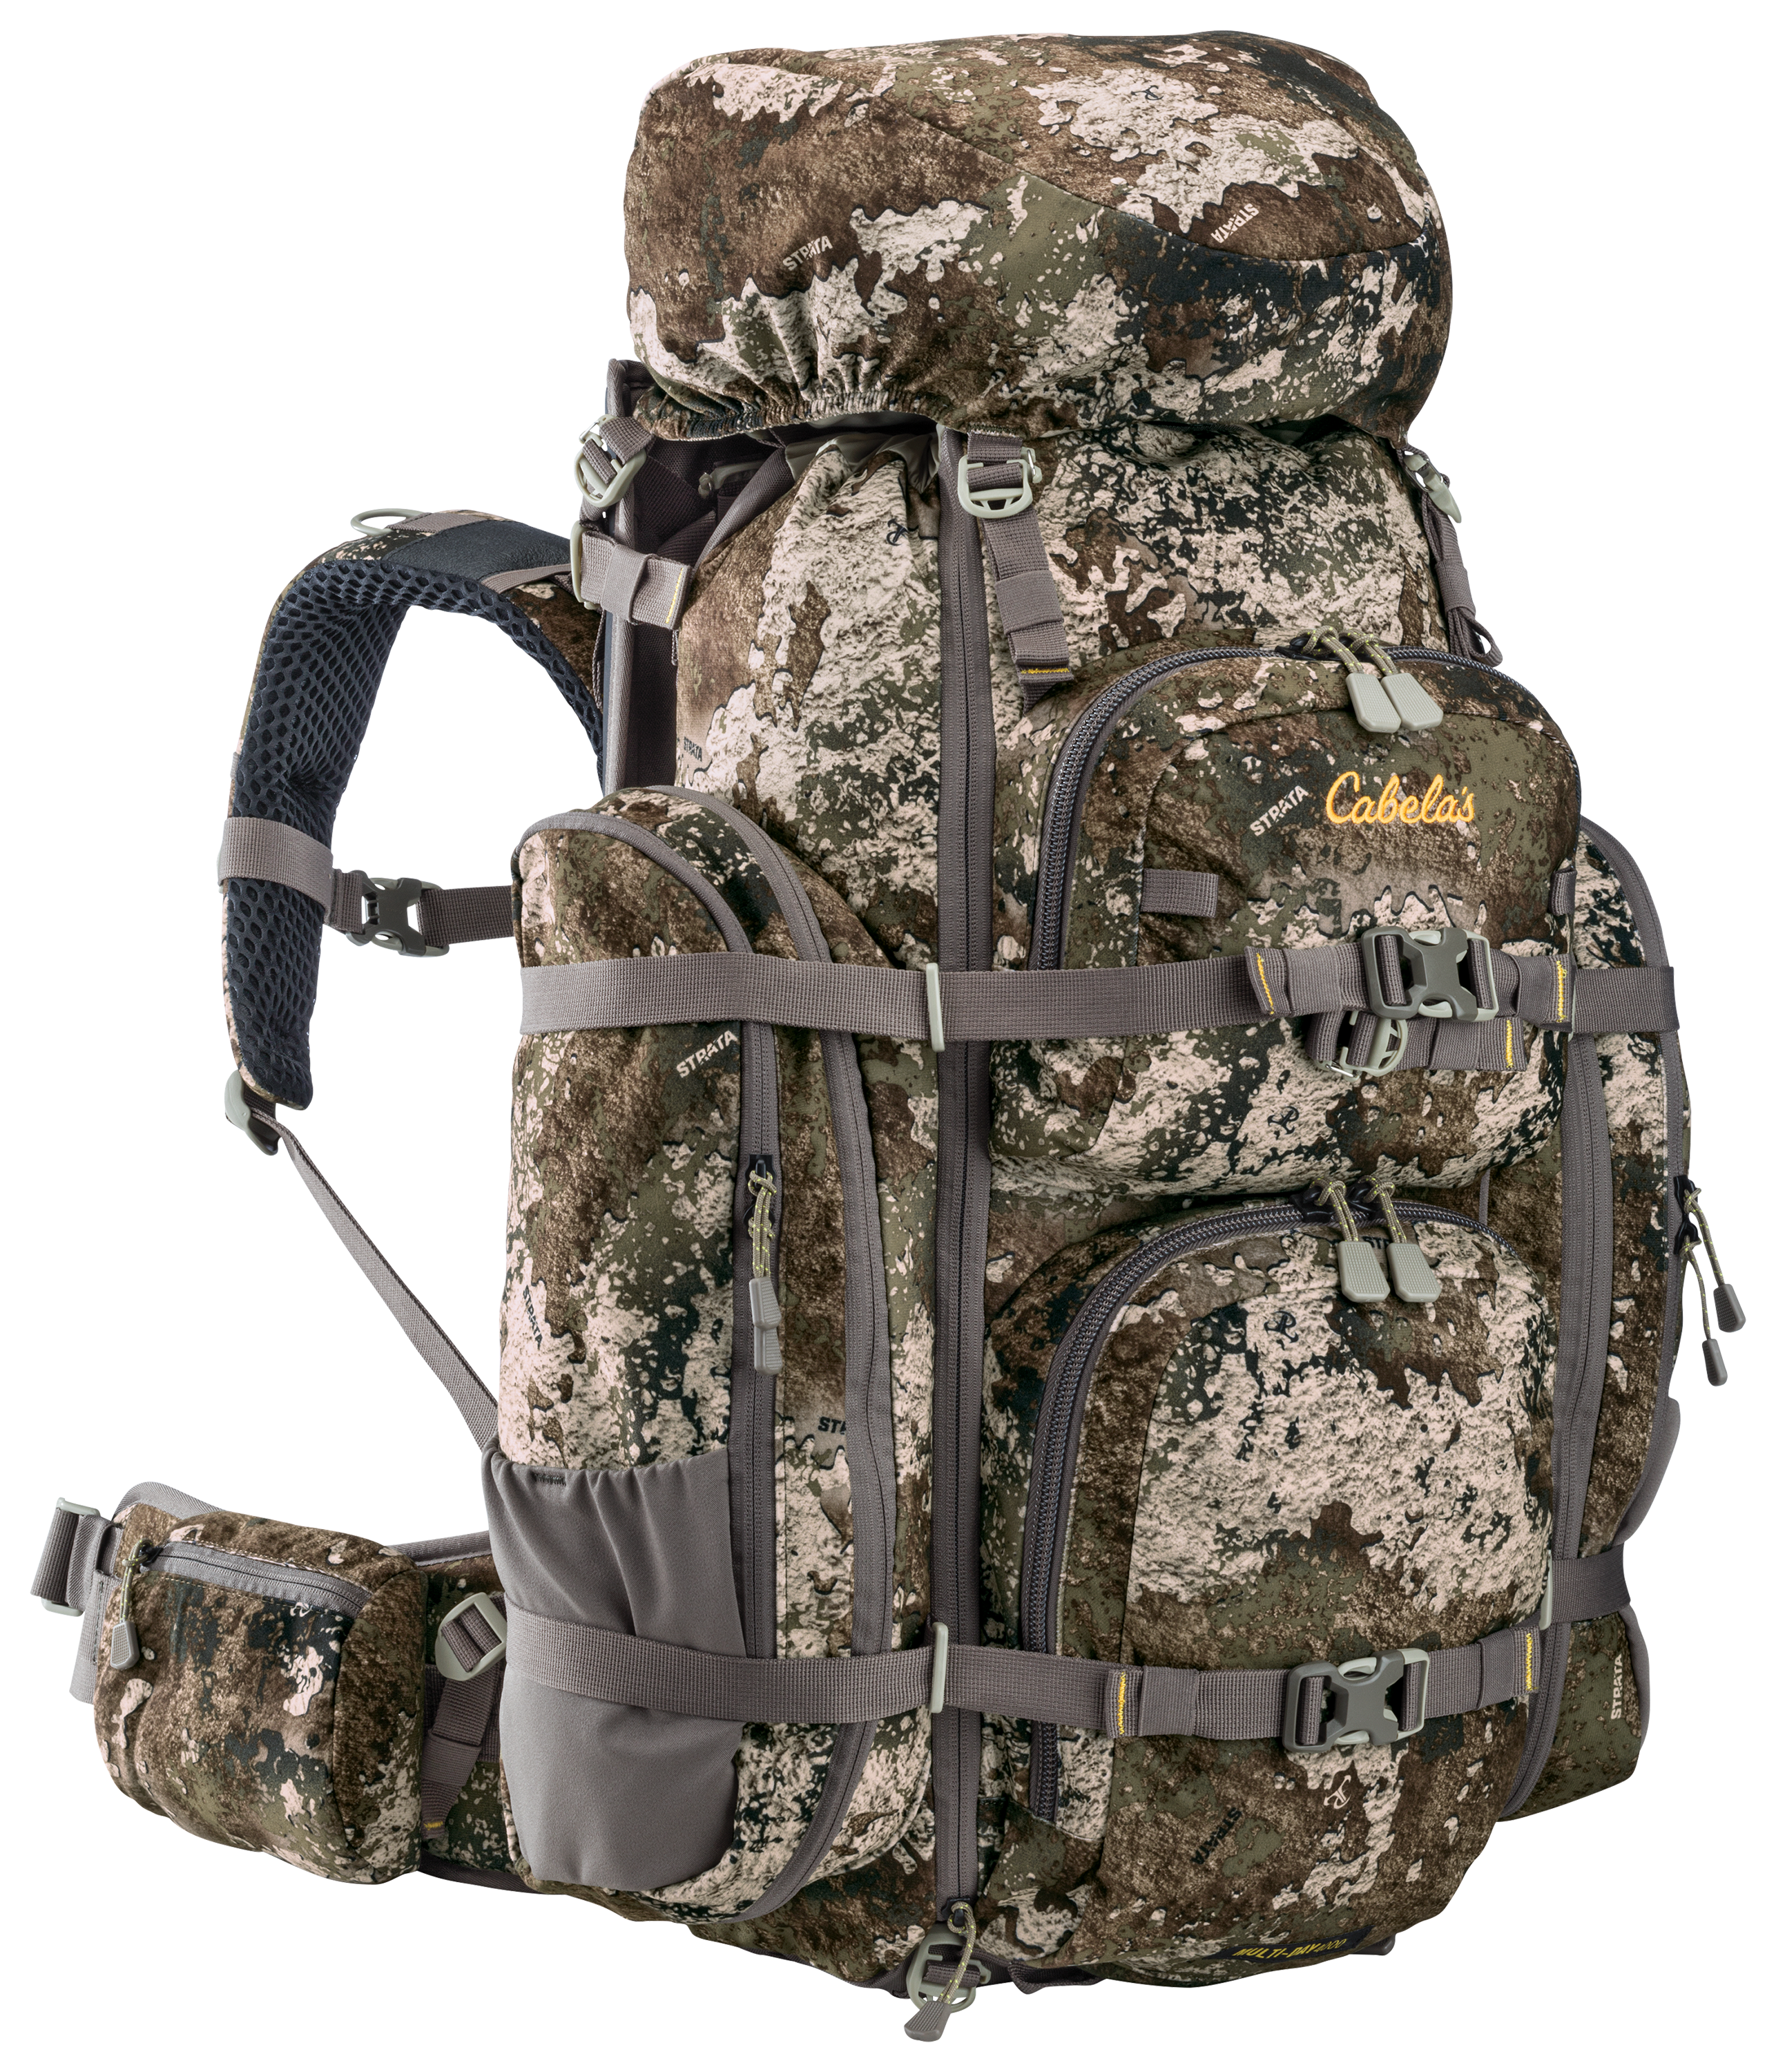 Cabela's Multi-Day Hunting Pack